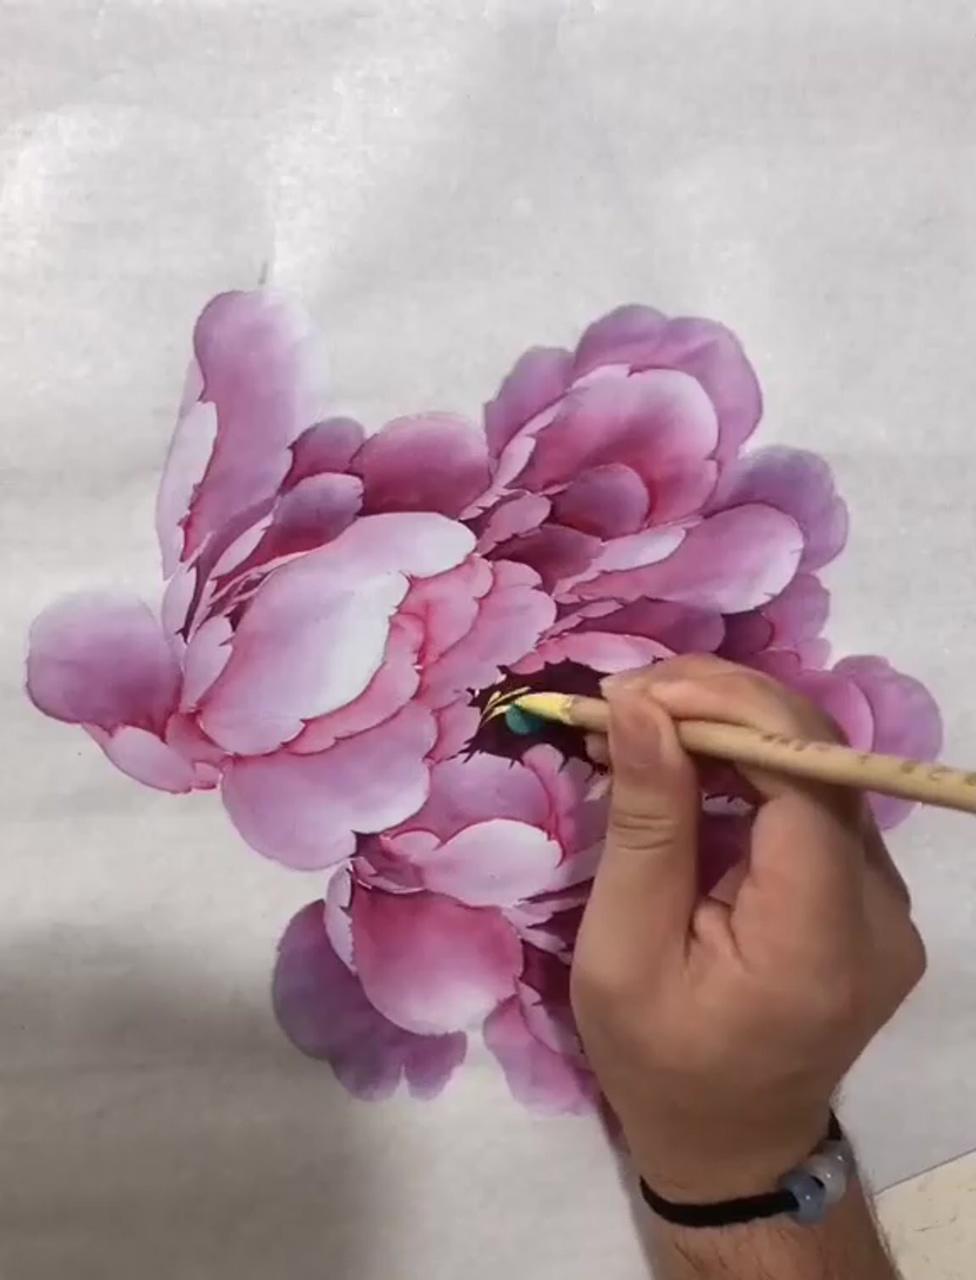 Unique style to draw a flower; painting flowers tutorial